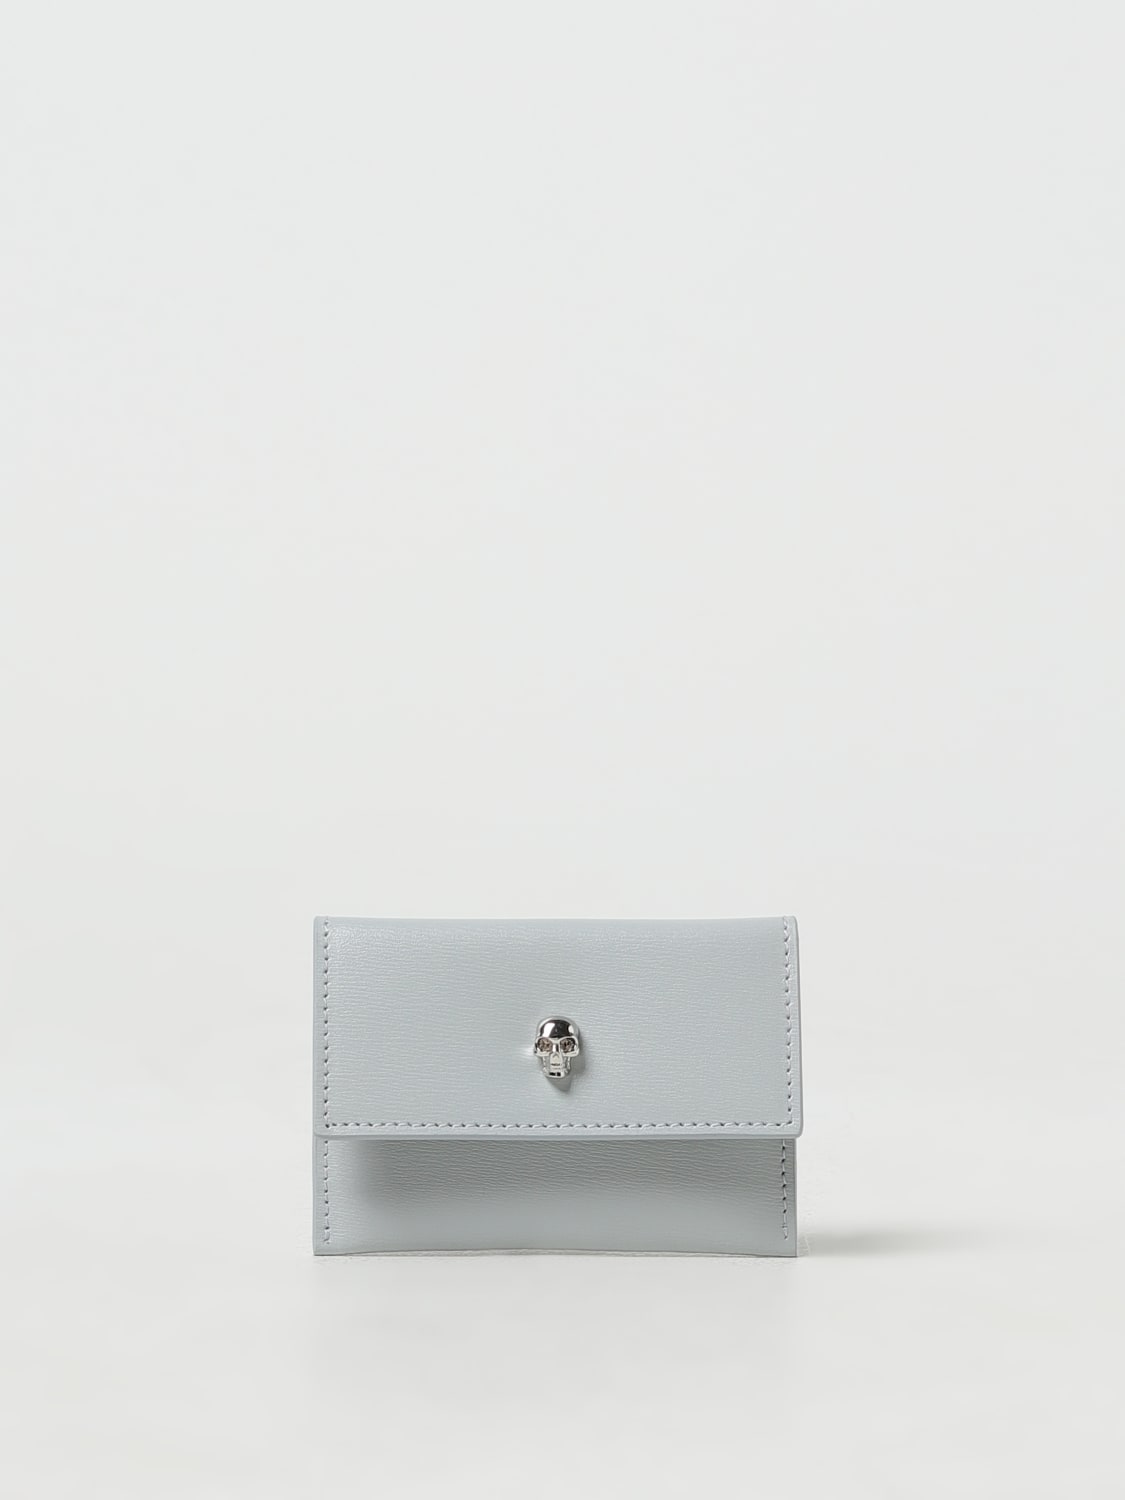 CHARLES & KEITH Wallets for Women - Vestiaire Collective